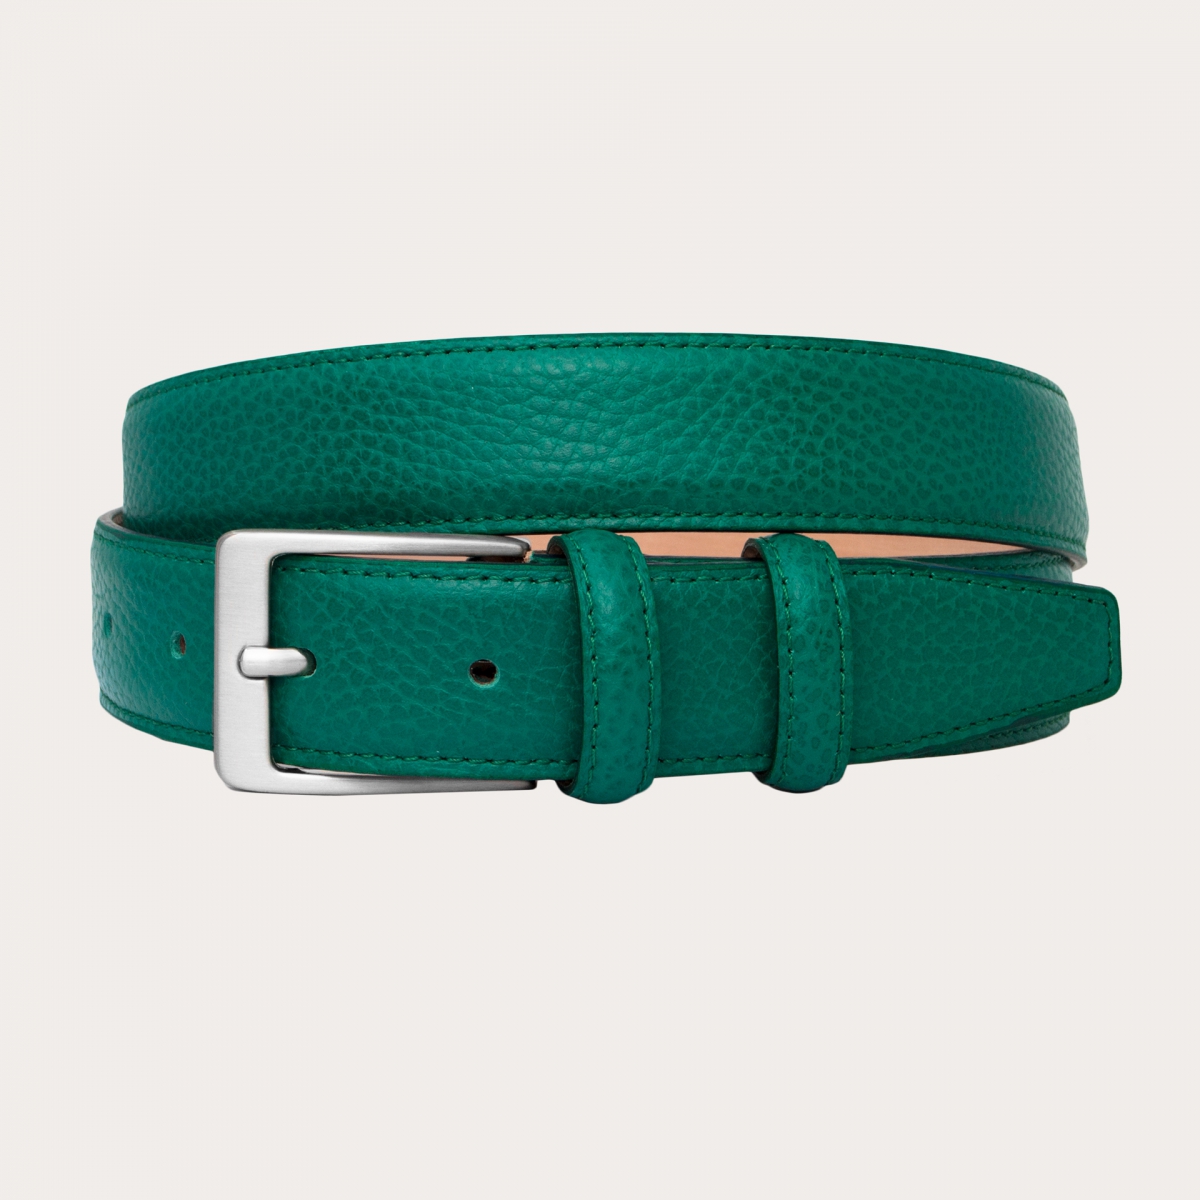 BRUCLE Low green belt in tumbled leather